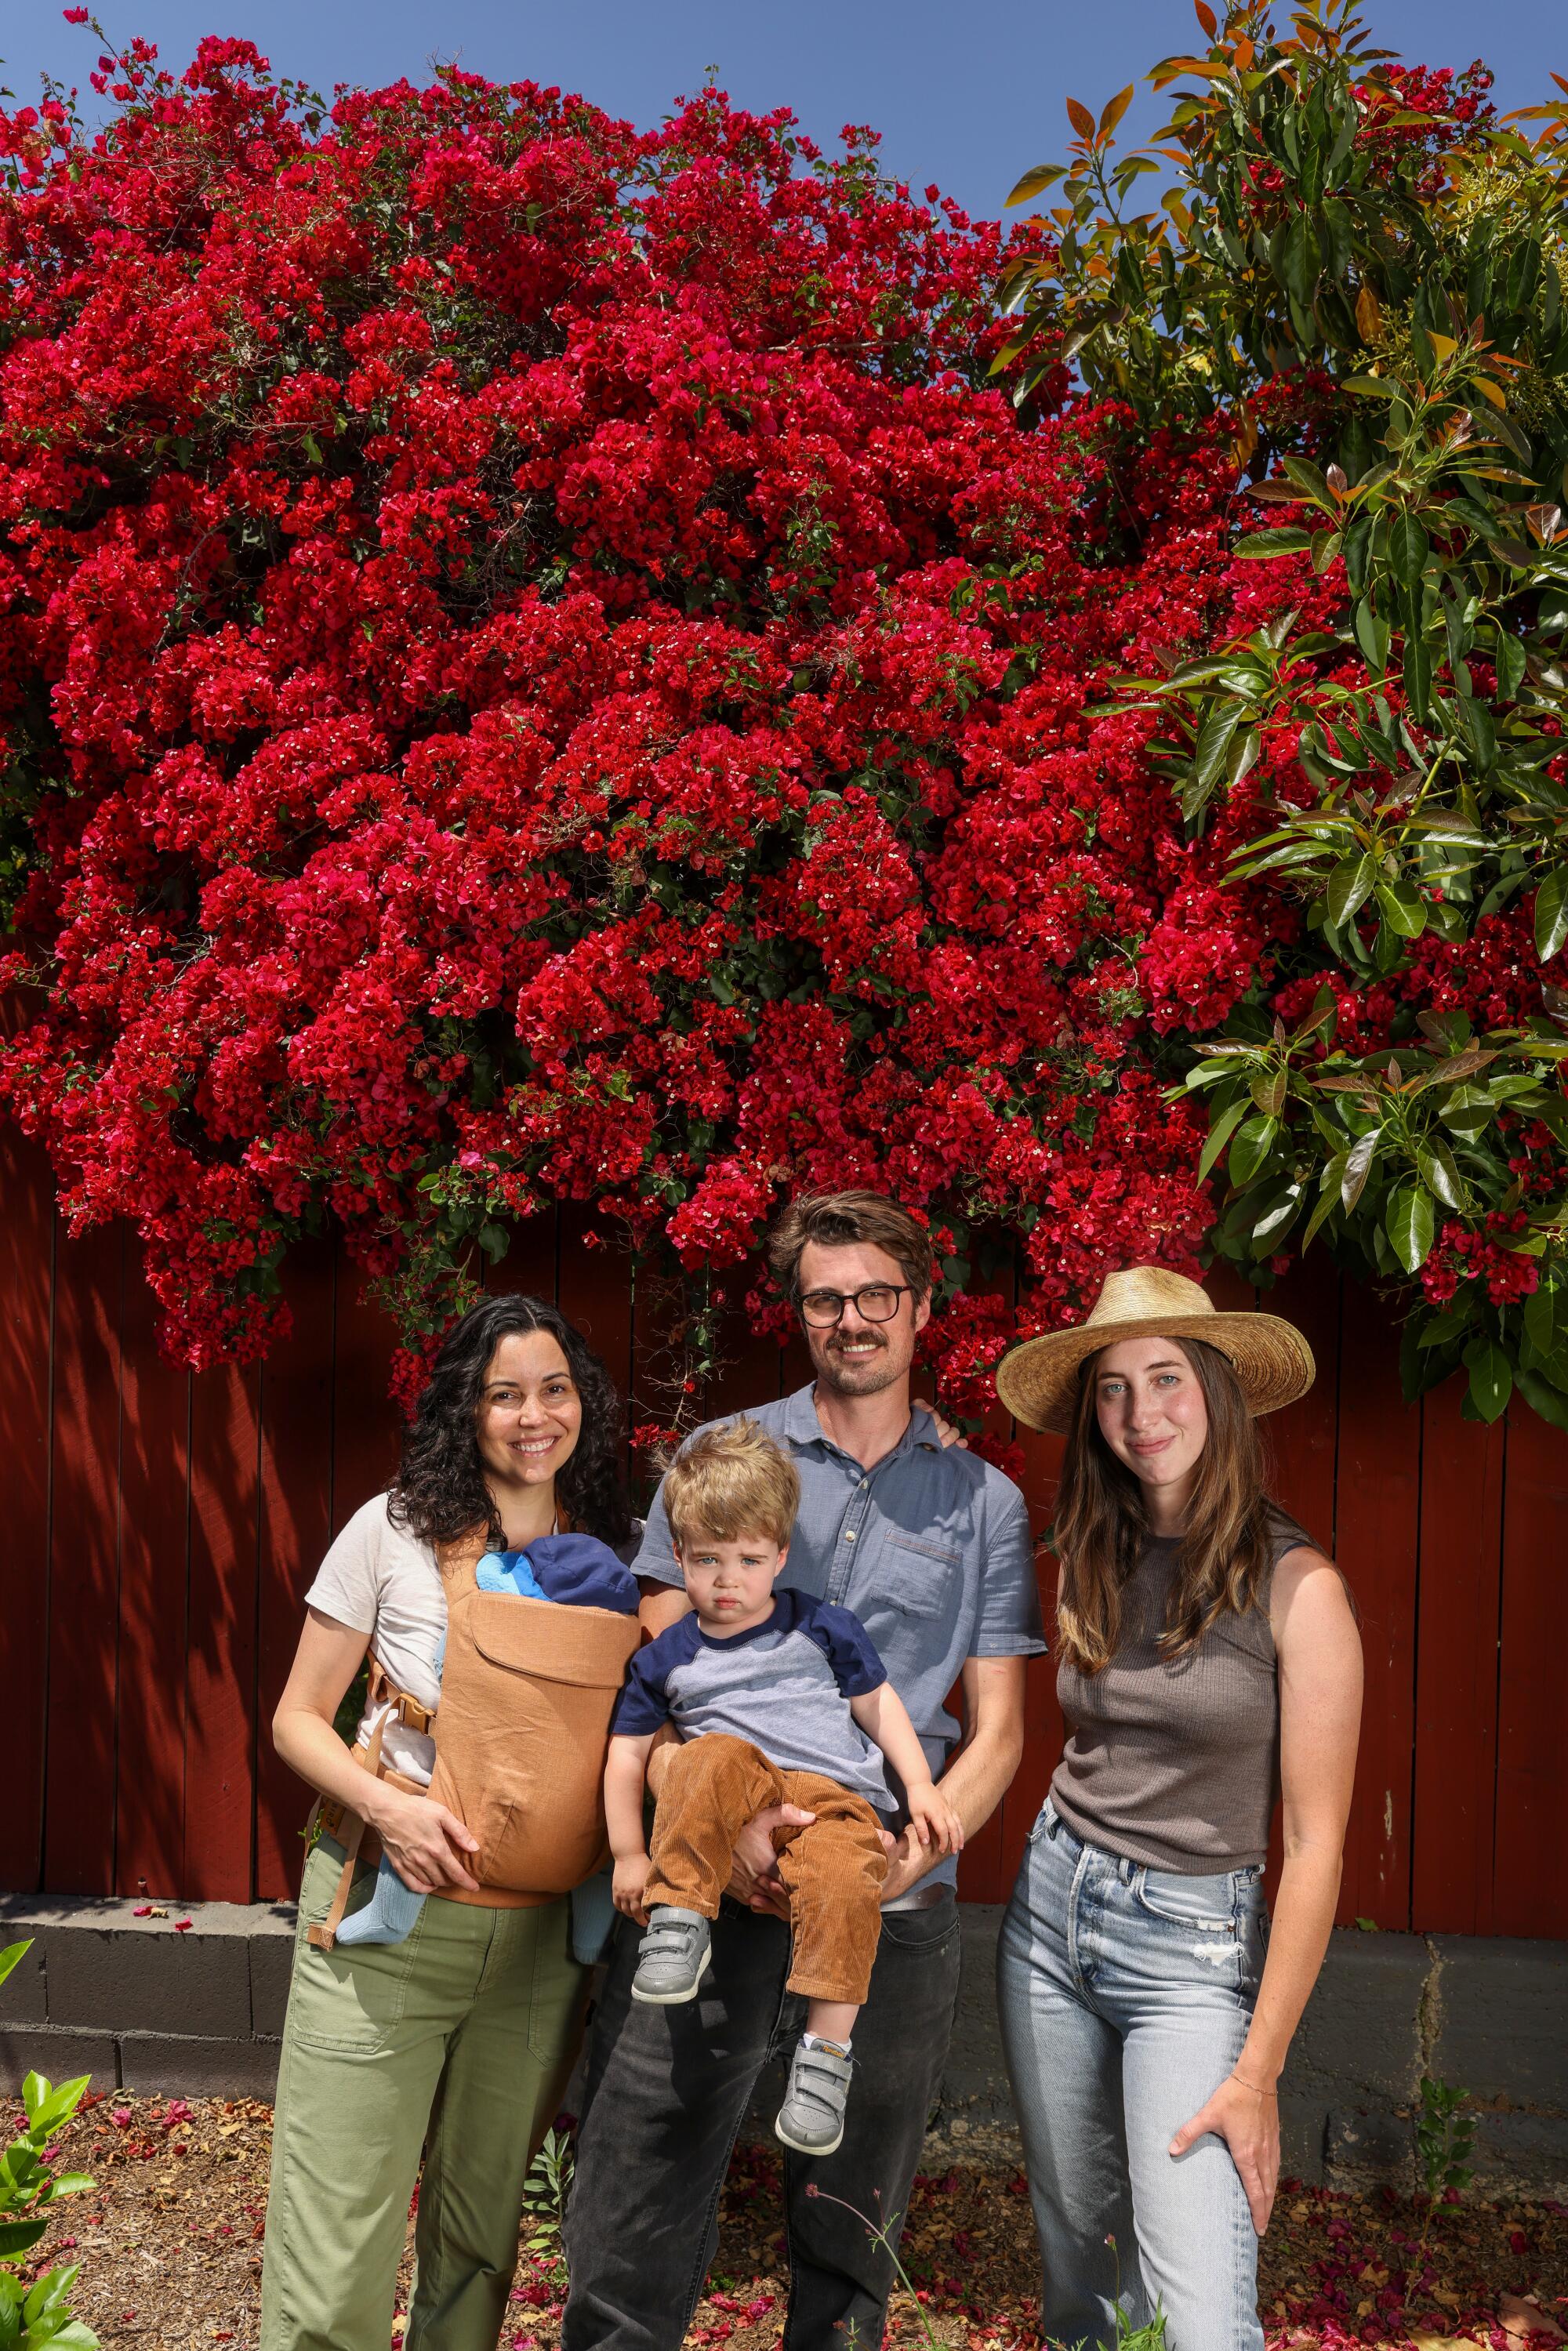 Two women, two children and one man stand for a portrait in front of a big red flowering plant.